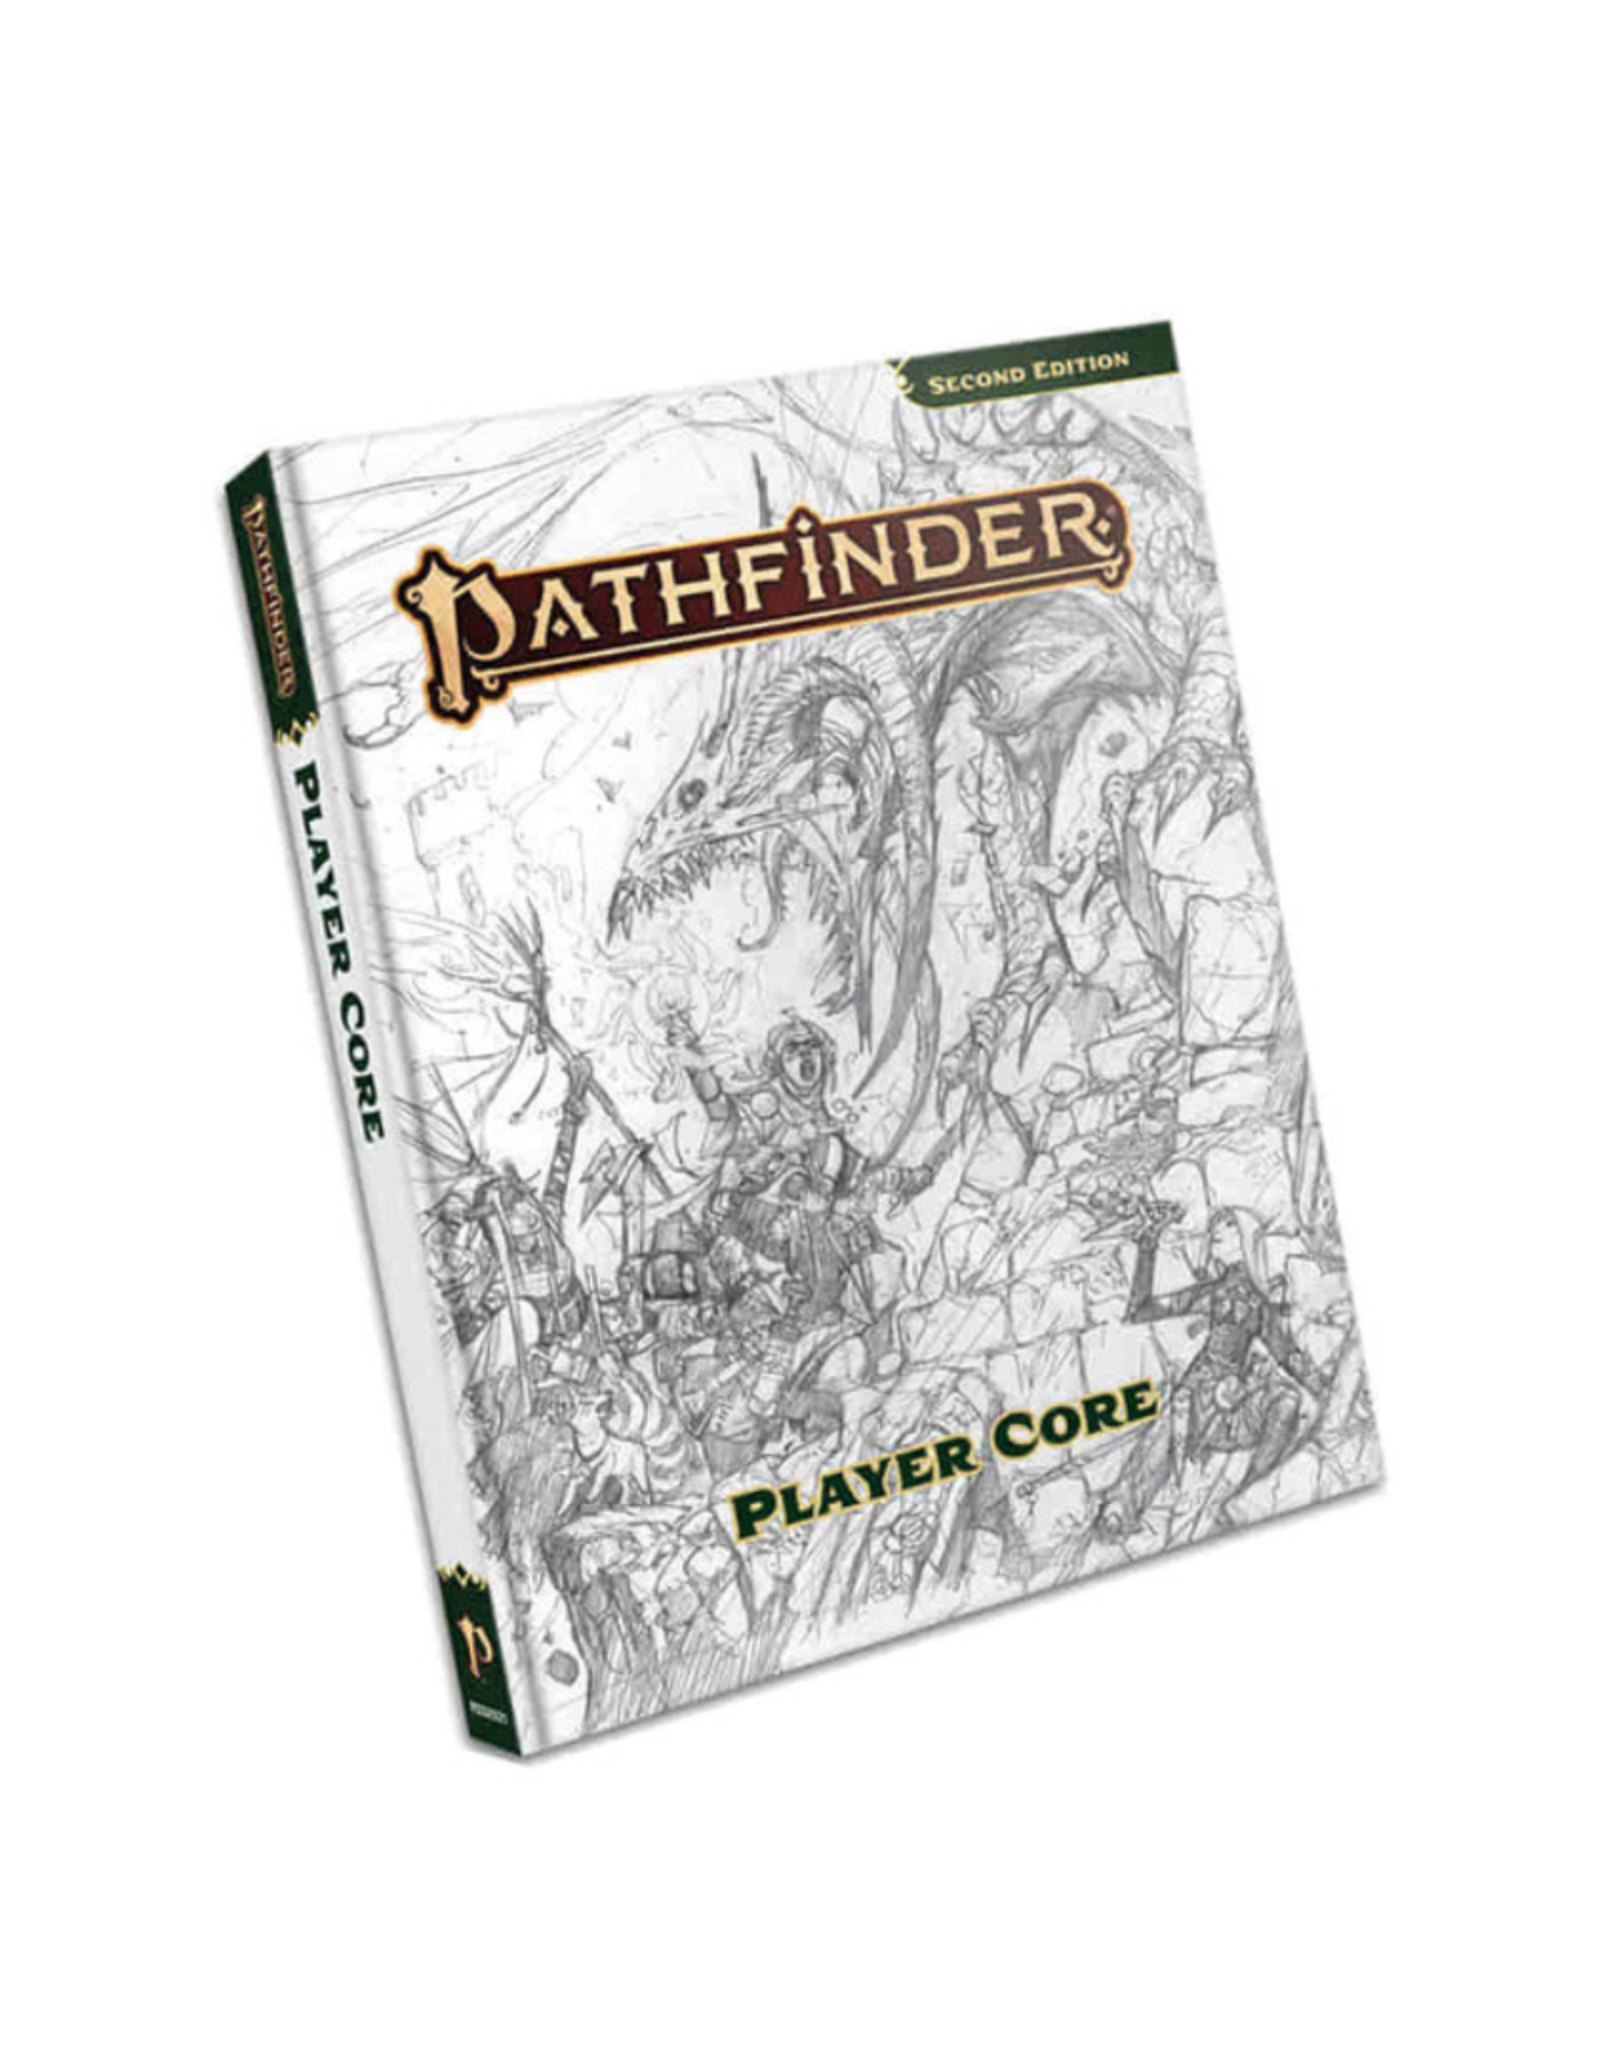 Pathfinder 2nd Edition: Player Core Remastered - Sketch Cover